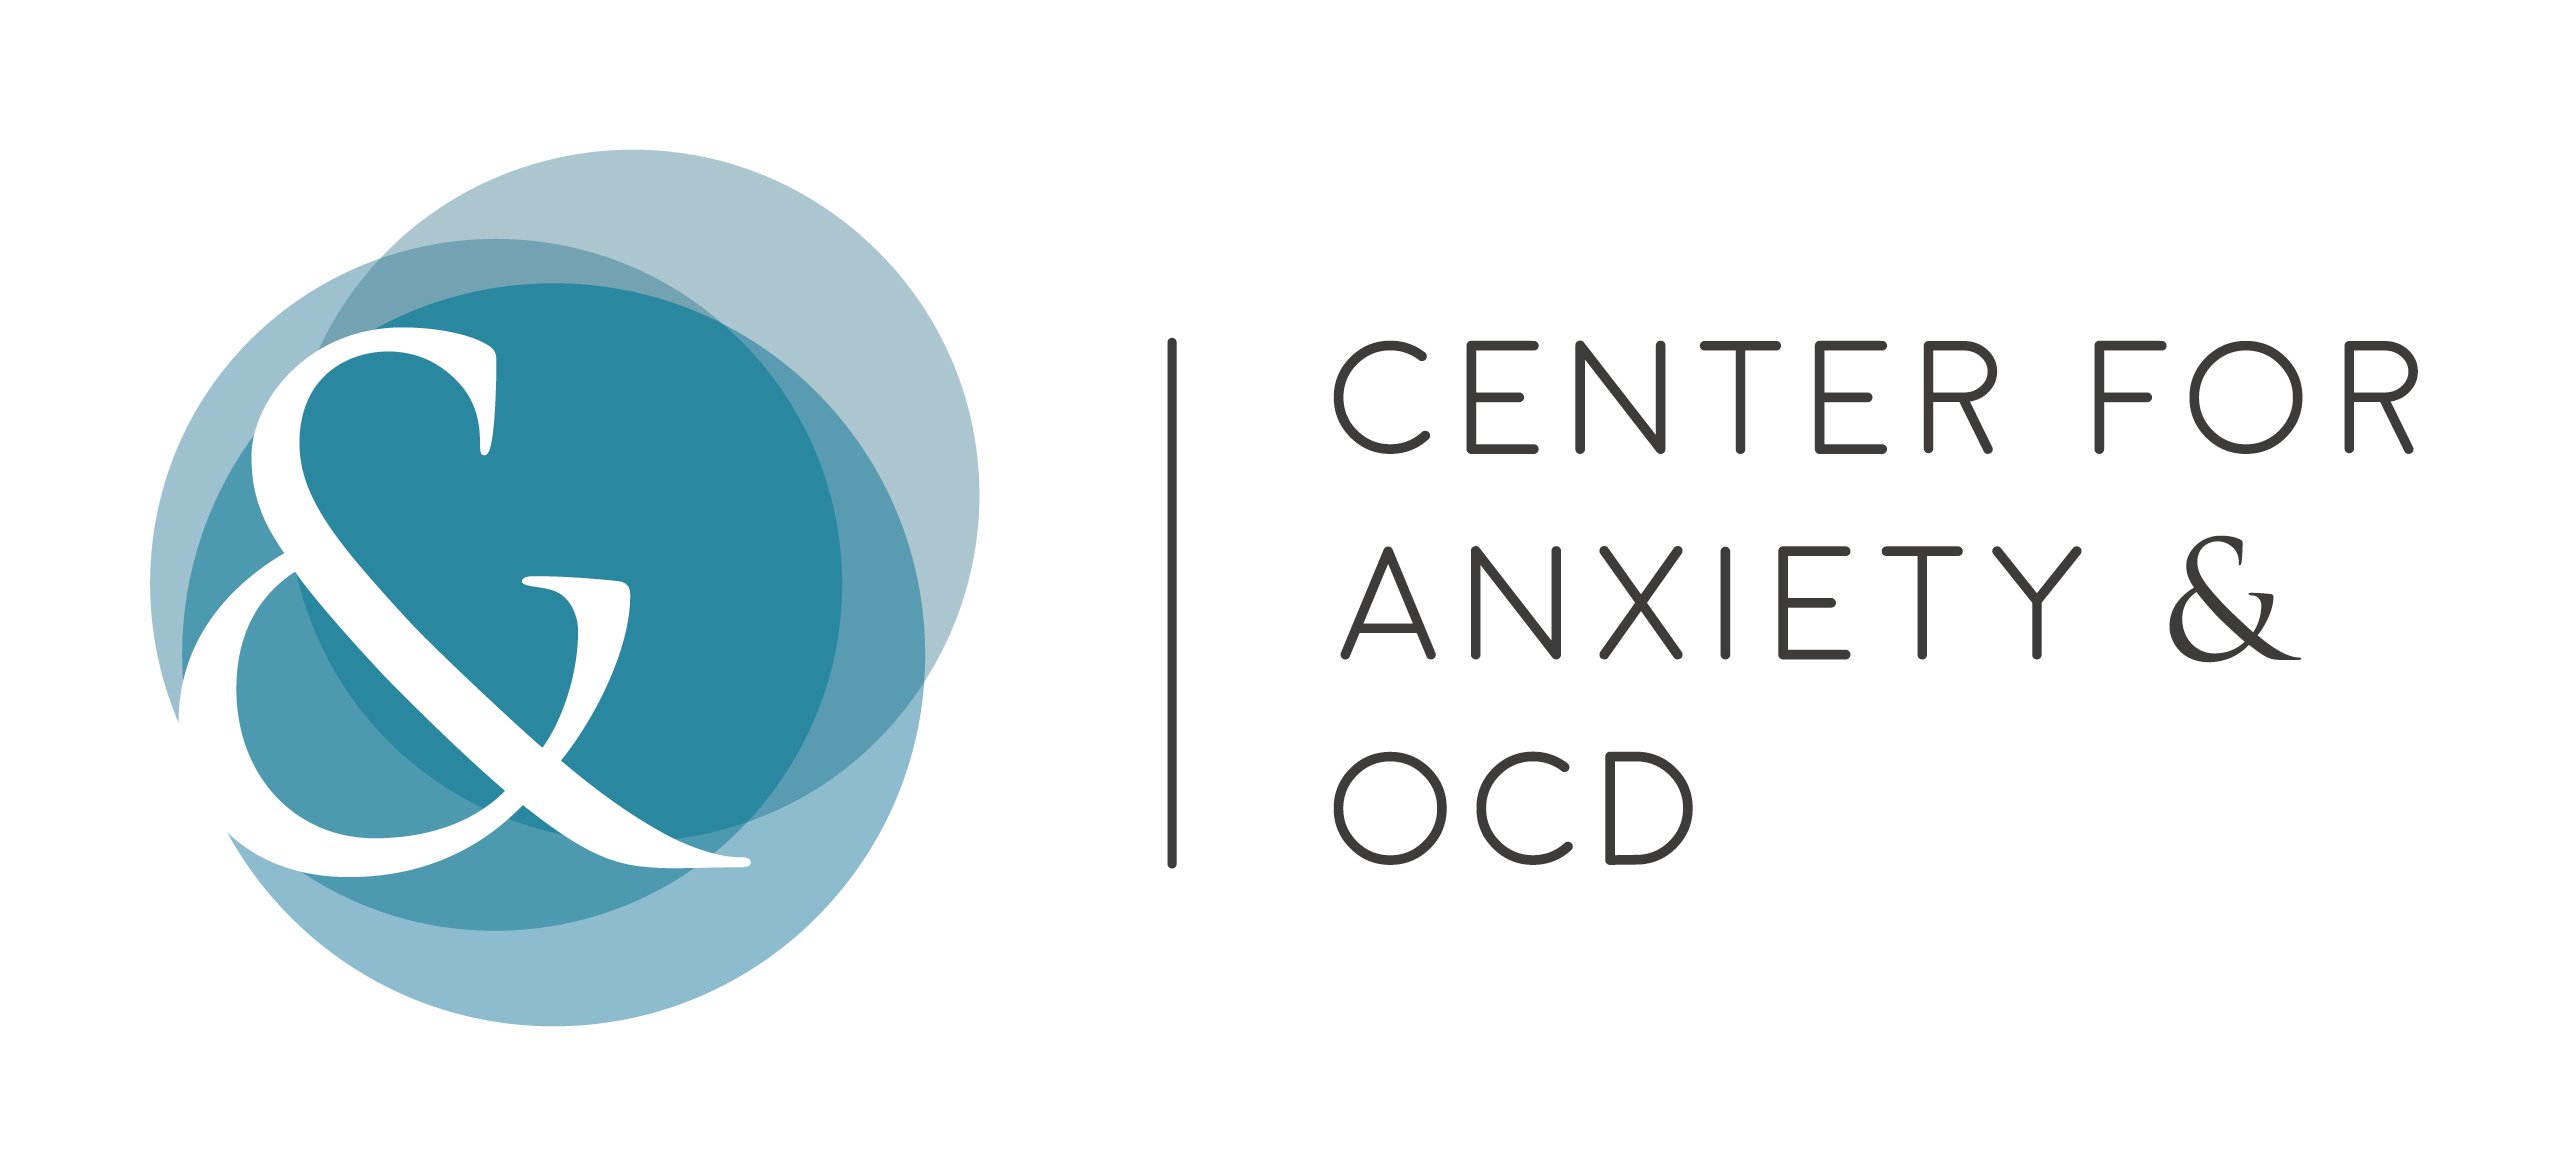 Center for Anxiety & OCD